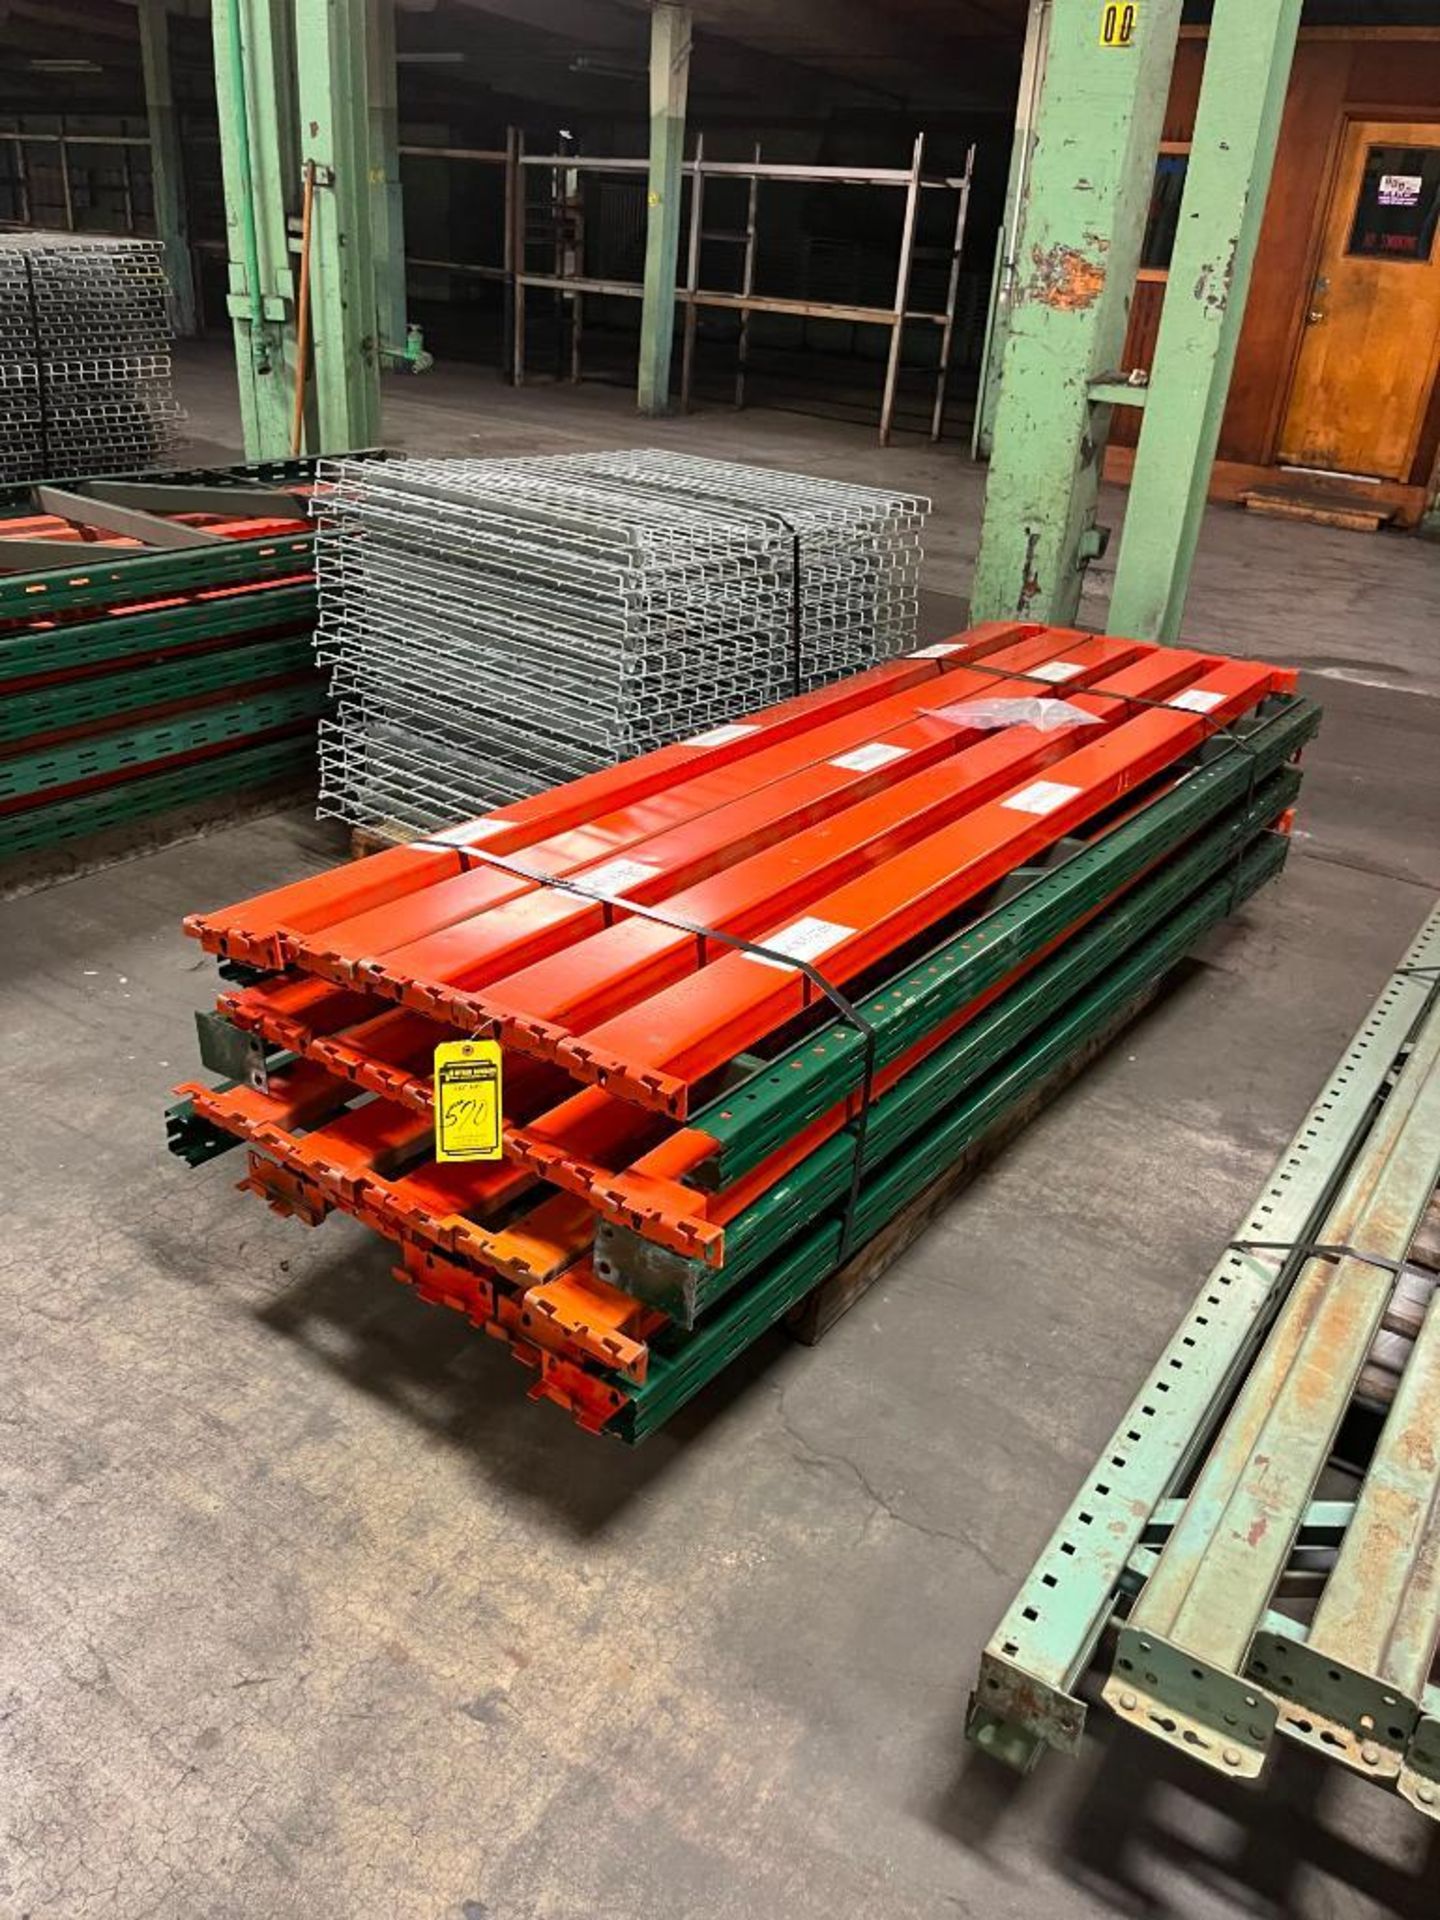 SKID OF SLOTTED STYLE PALLET RACK INCL.: (3) 10' X 36" SLOTTED UPRIGHTS, (20) 4" X 96" CROSS BEAMS